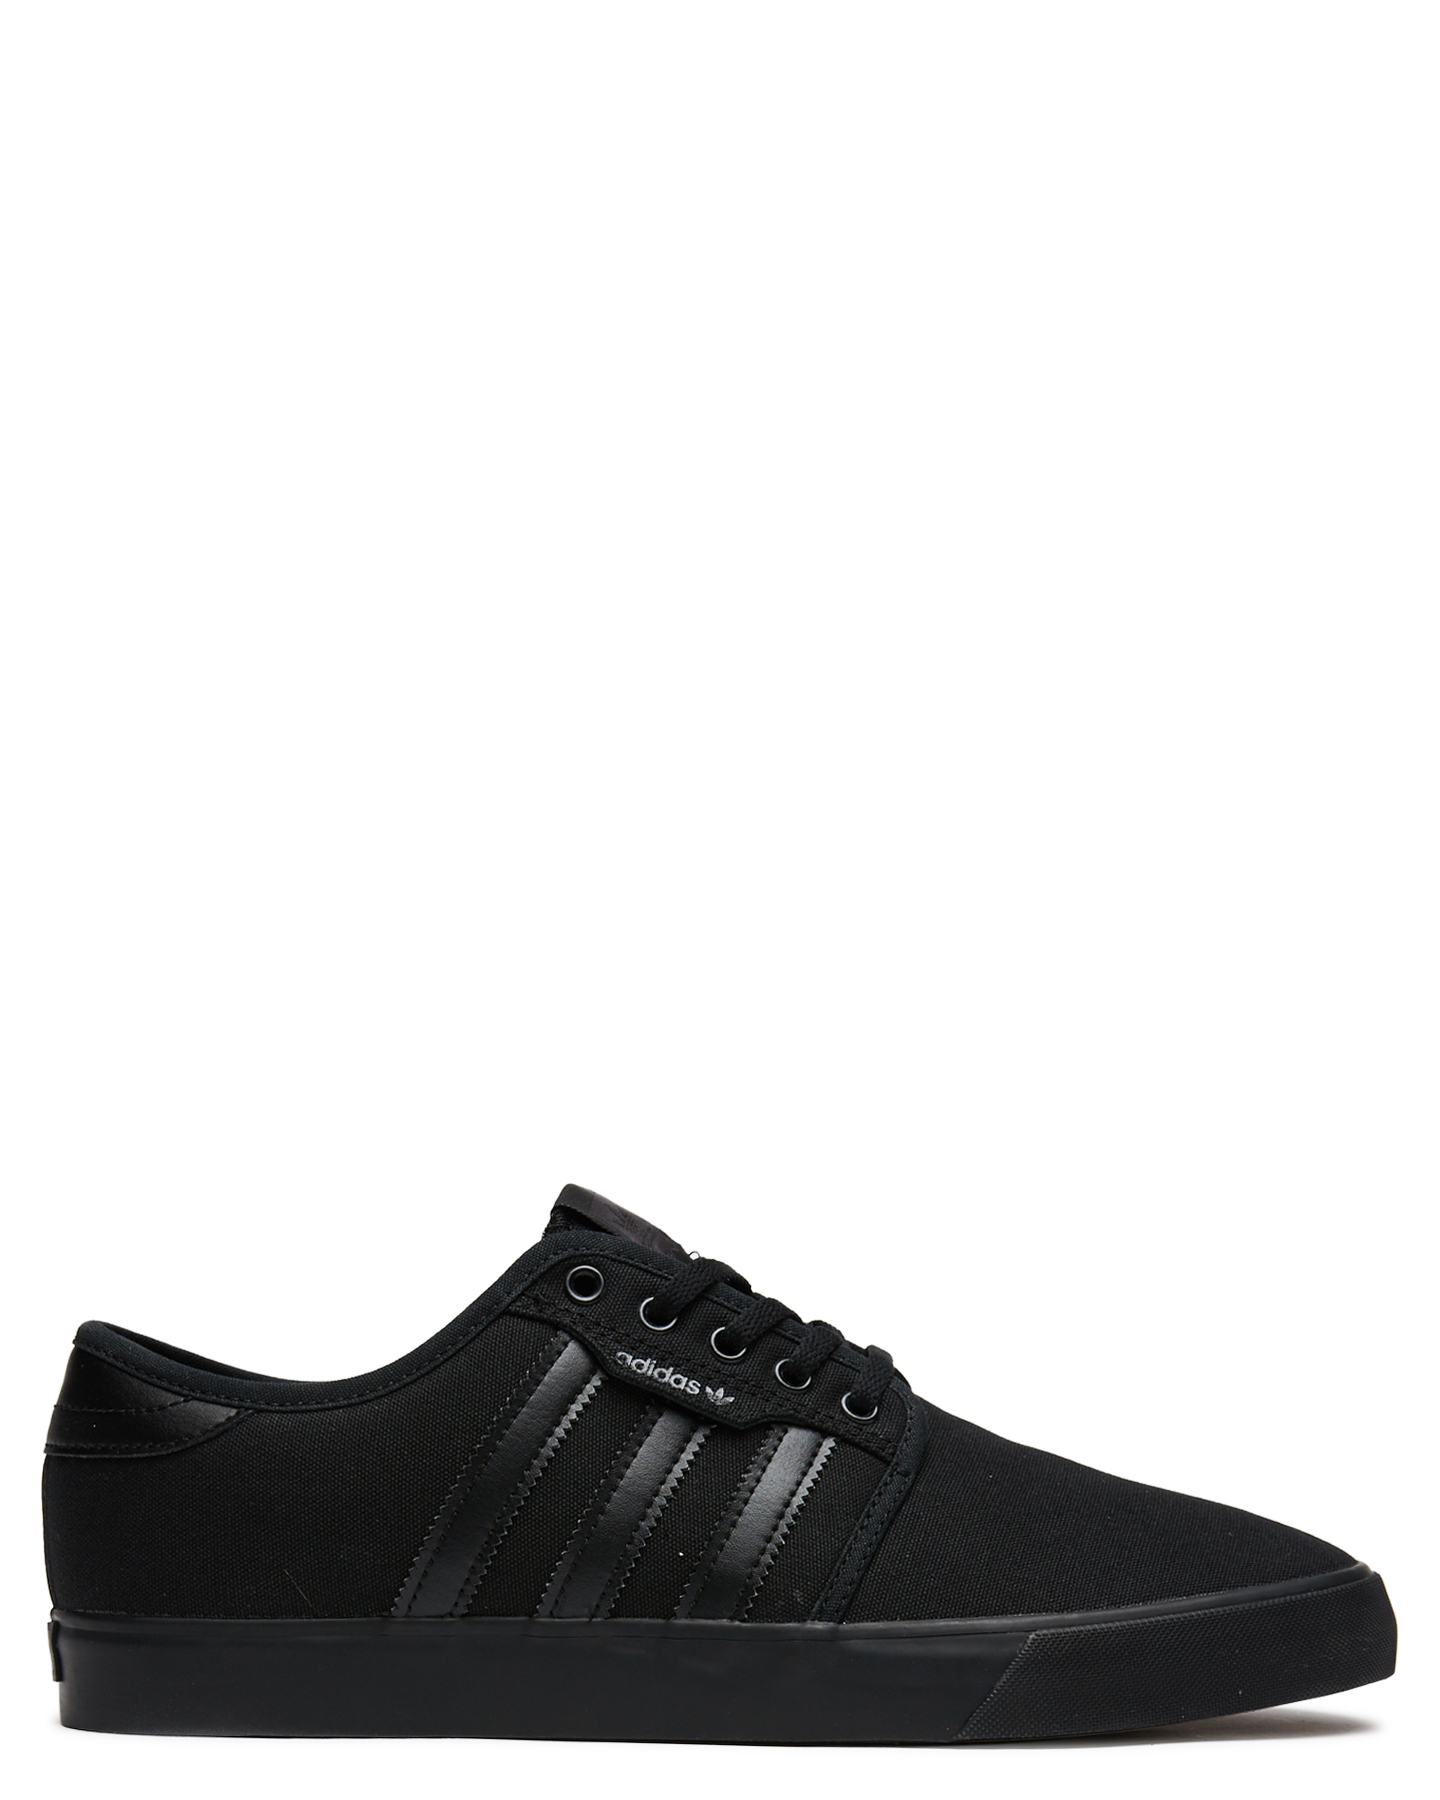 adidas seeley shoes